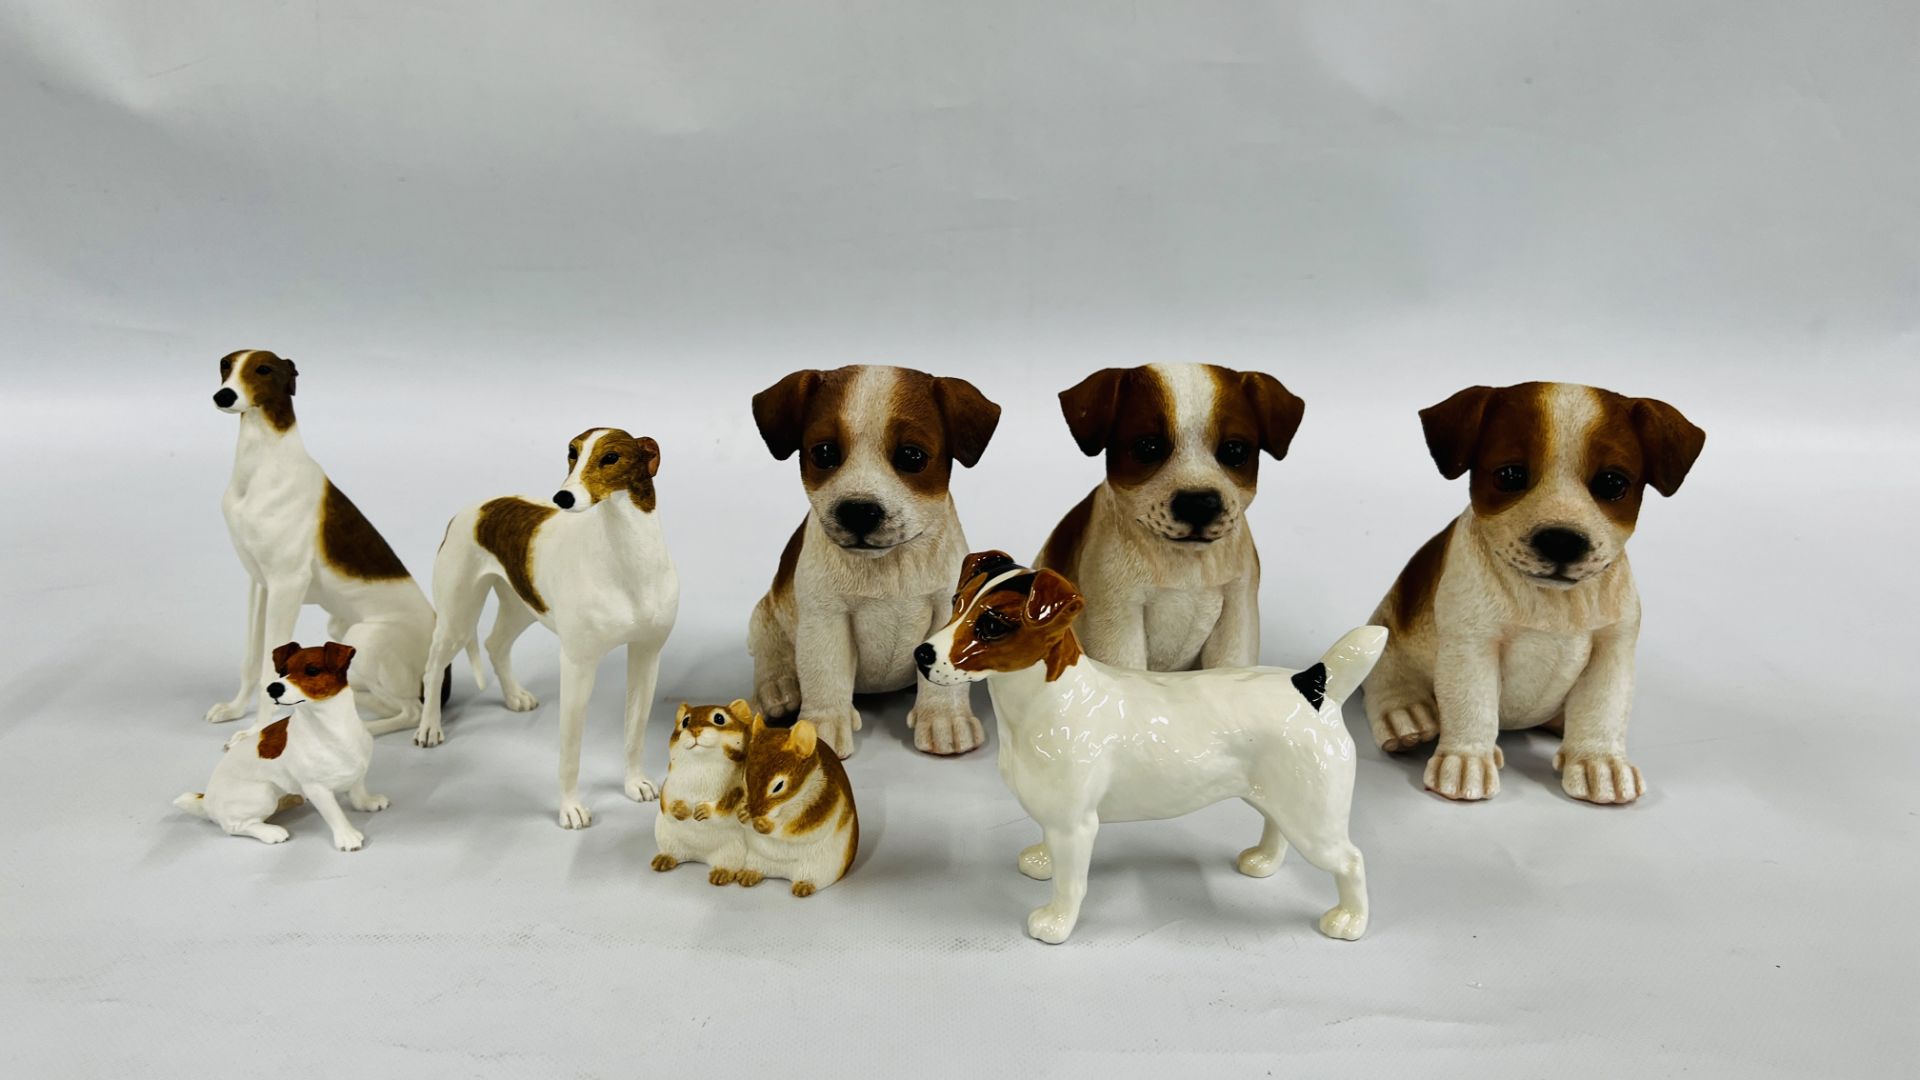 A BESWICK MODEL OF A JACK RUSSELL TERRIER L 15.5CM X H 11.